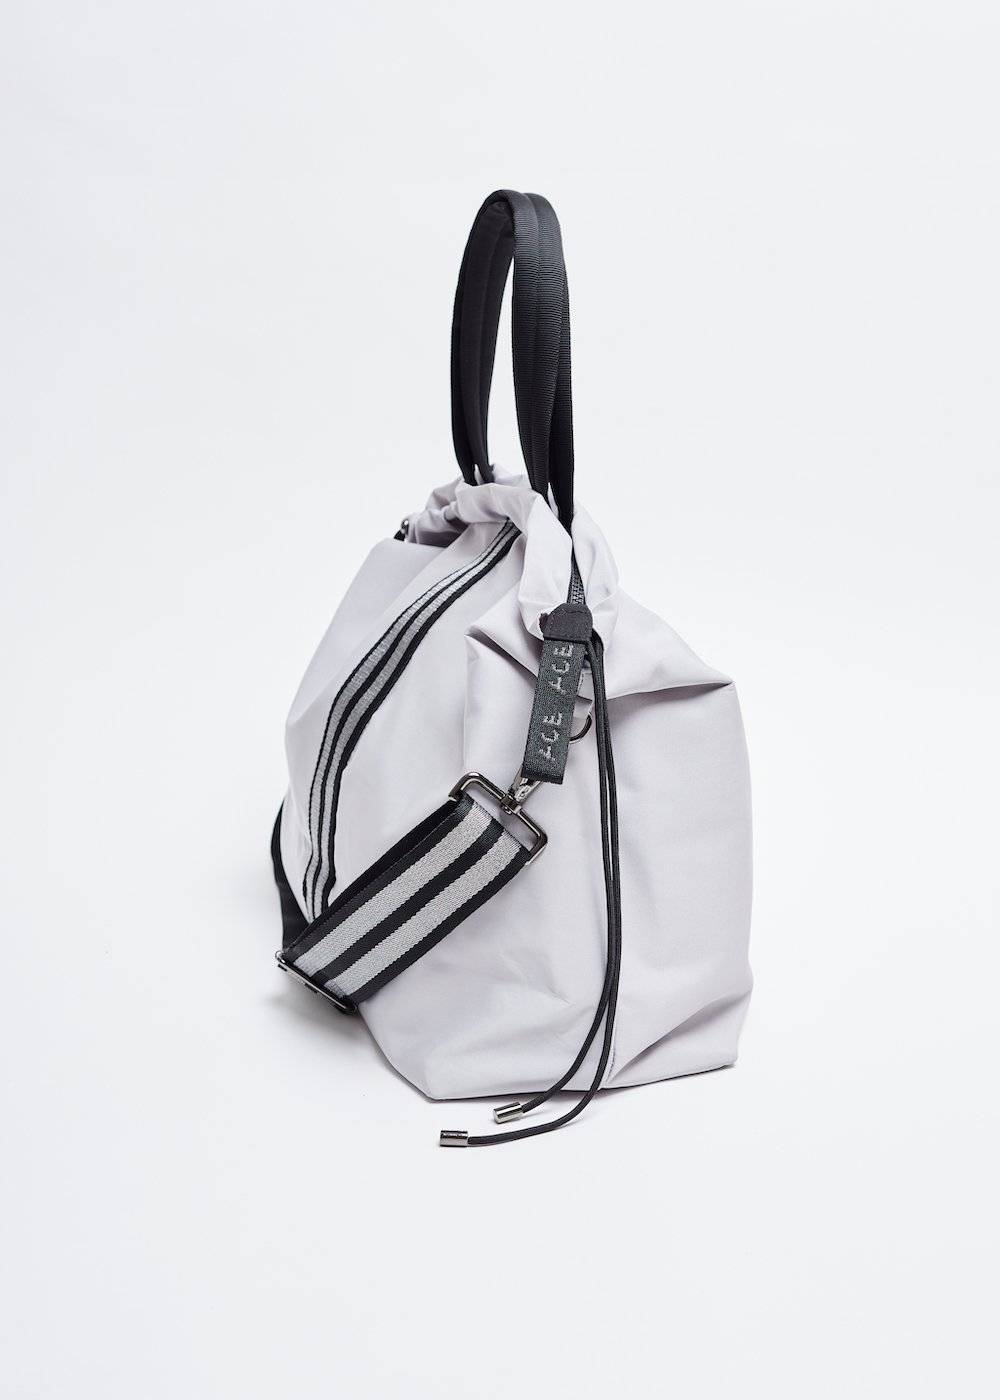 Tote Bag Made From Recycled Ocean Plastic - Light Grey